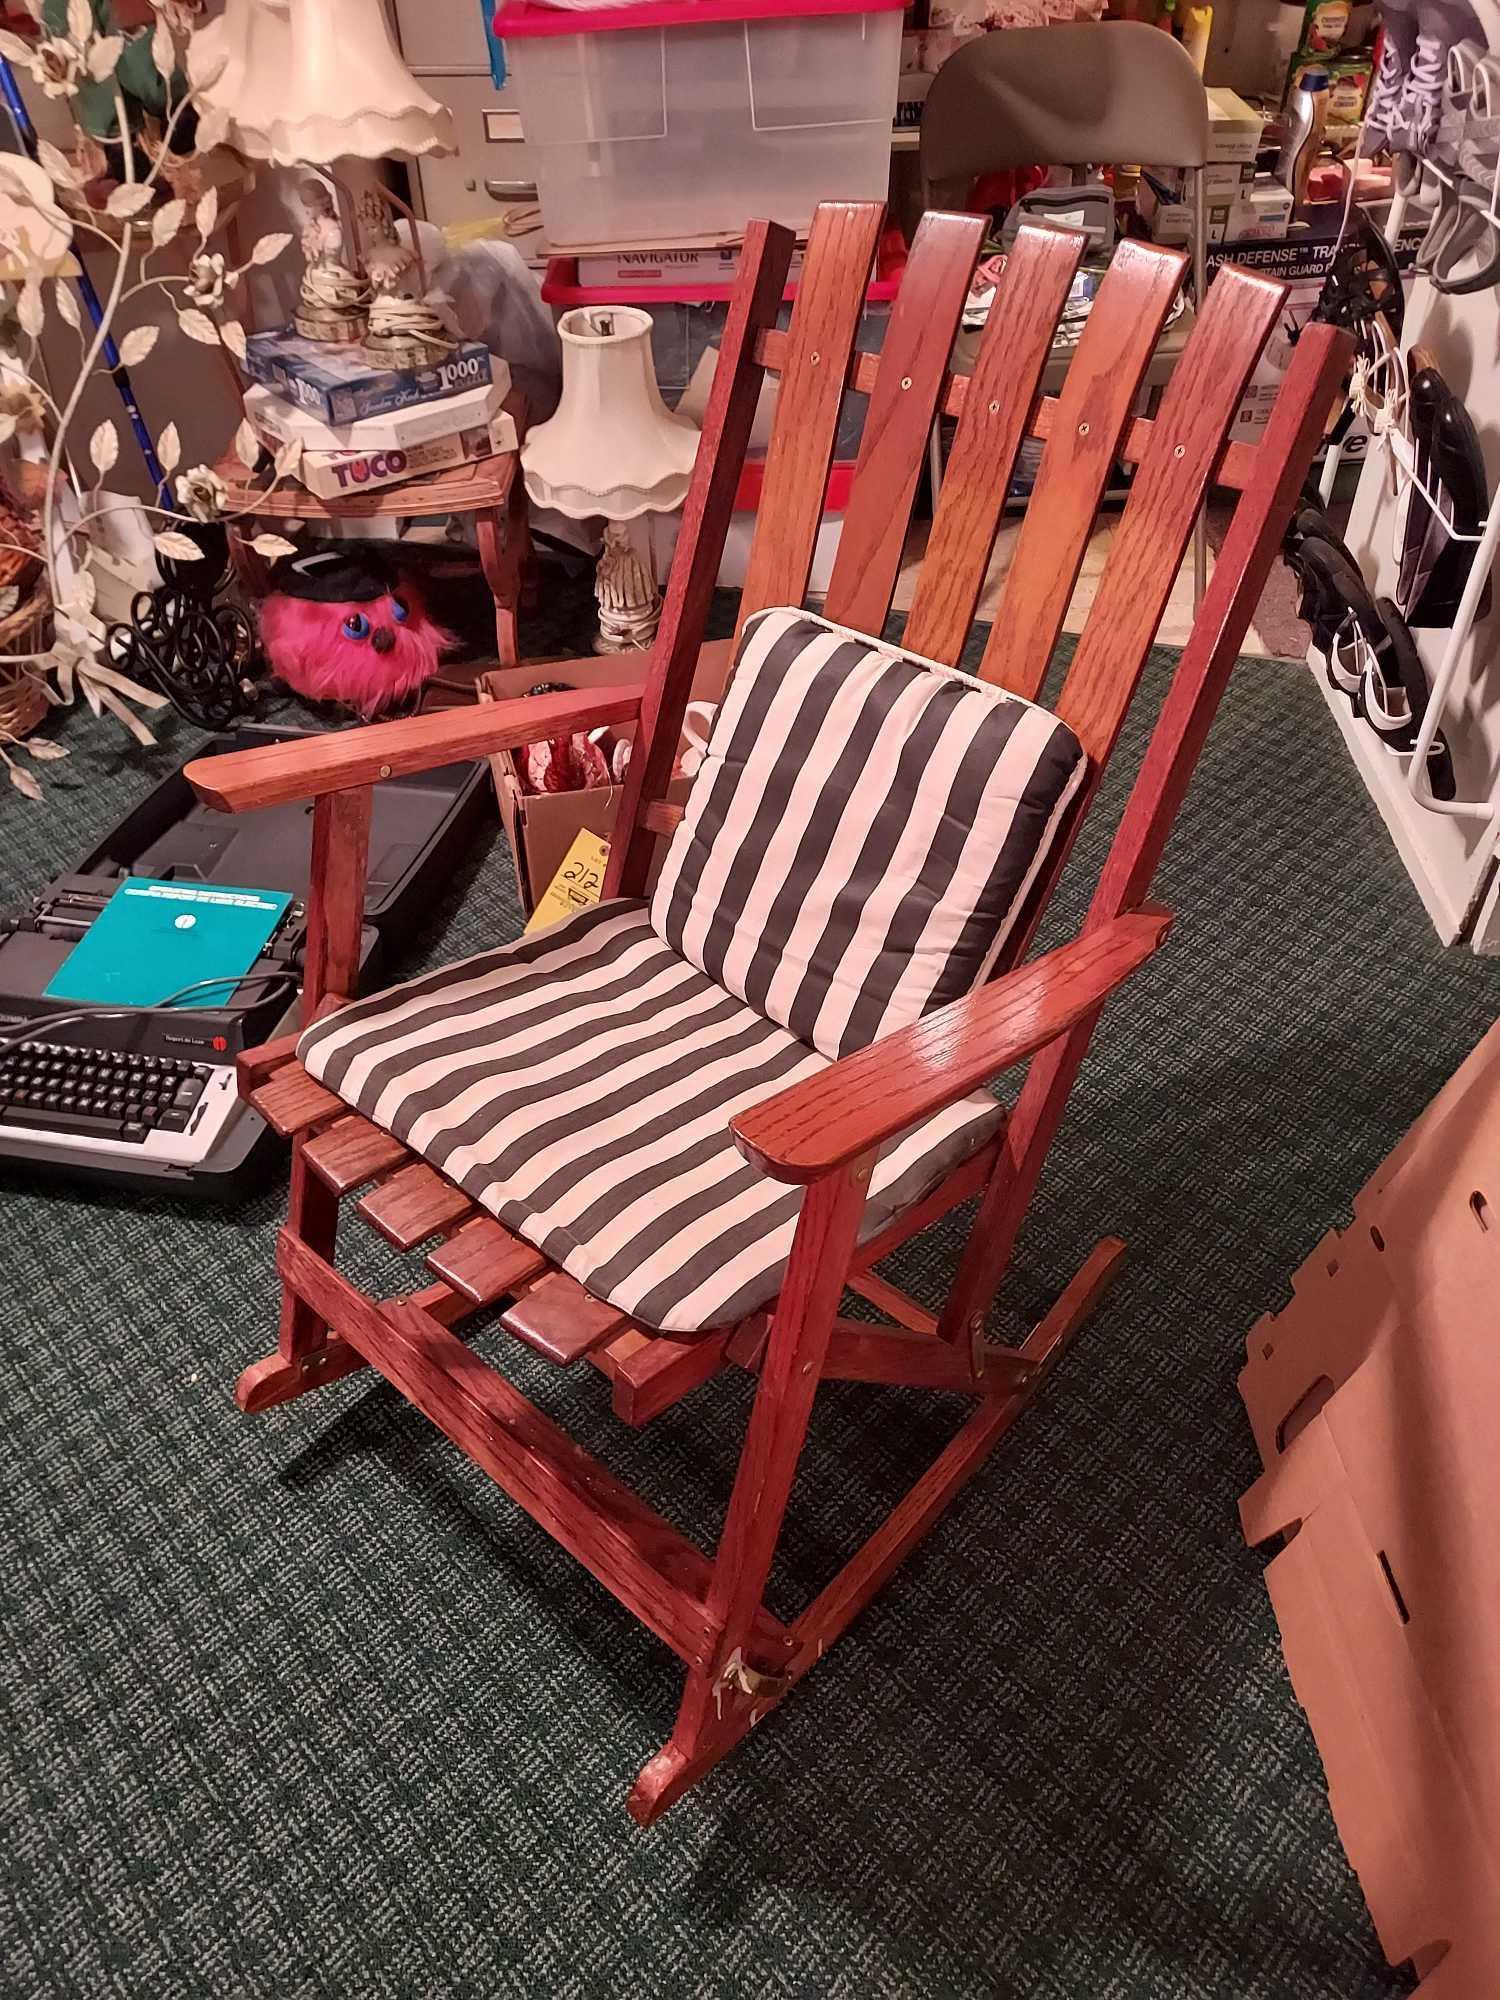 2 Vintage Wooden Folding Chairs